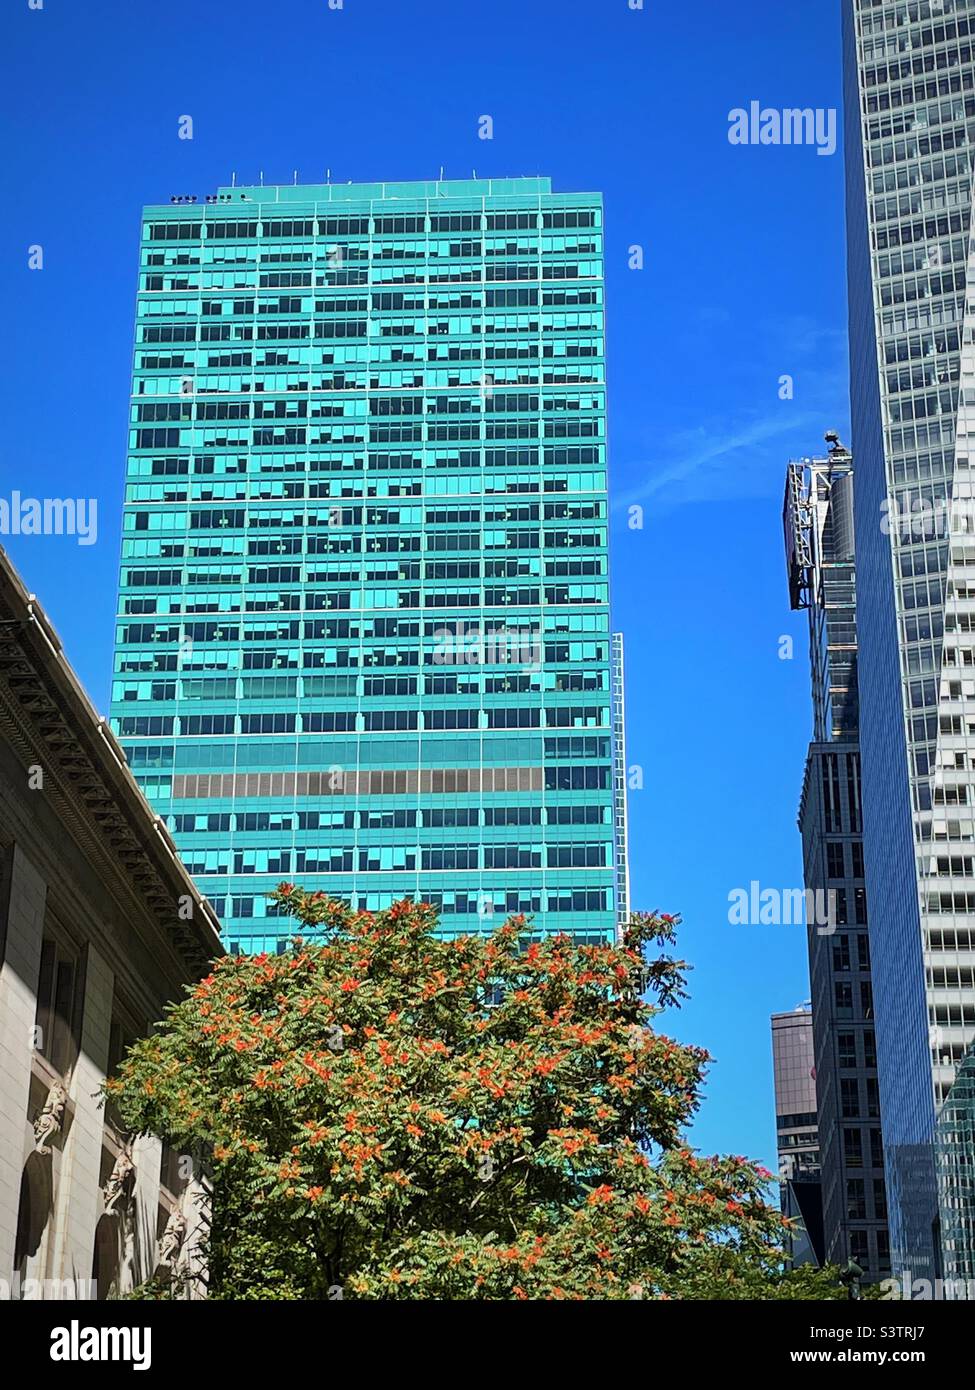 The salesforce Tower at the corner of W. 42nd St. and Avenue of the Americas is an imposing skyscraper across from Bryant Park, 2022, NYC, USA Stock Photo